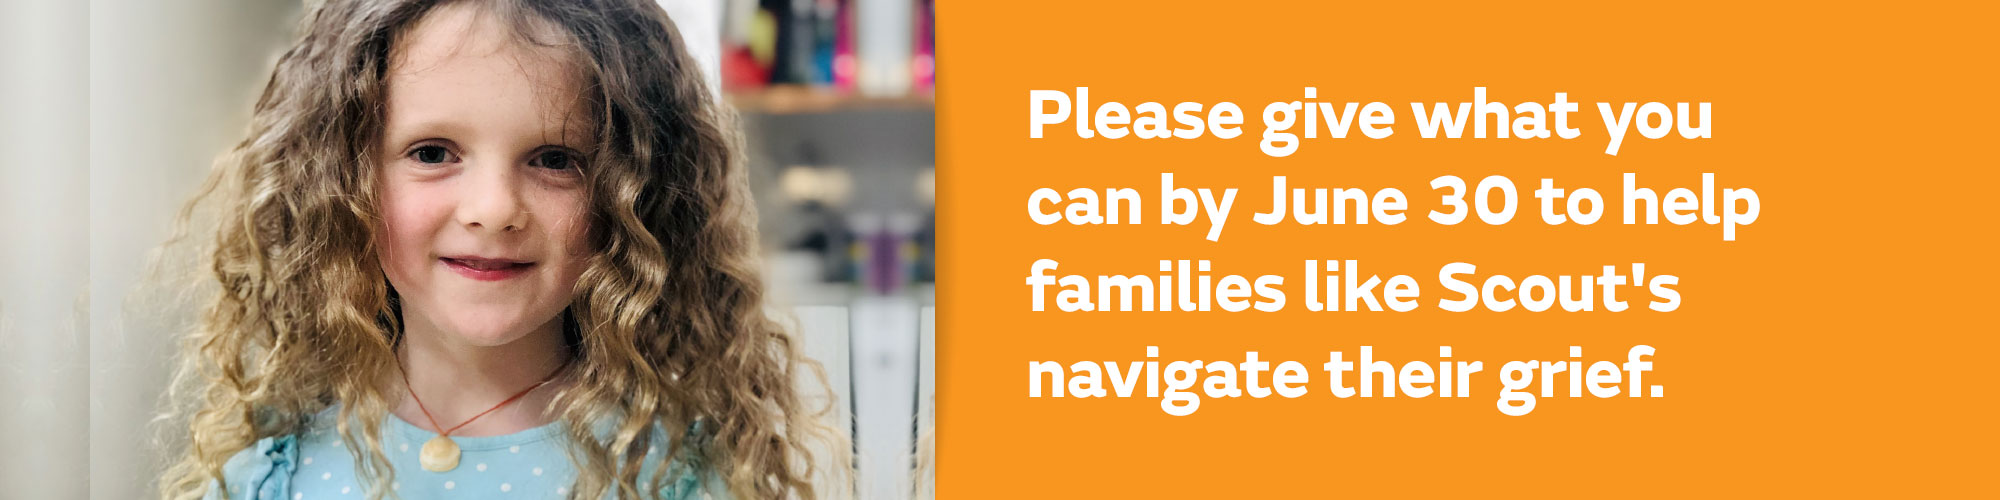 Please give what you can by June 30 to help families like Scout's navigate their grief.